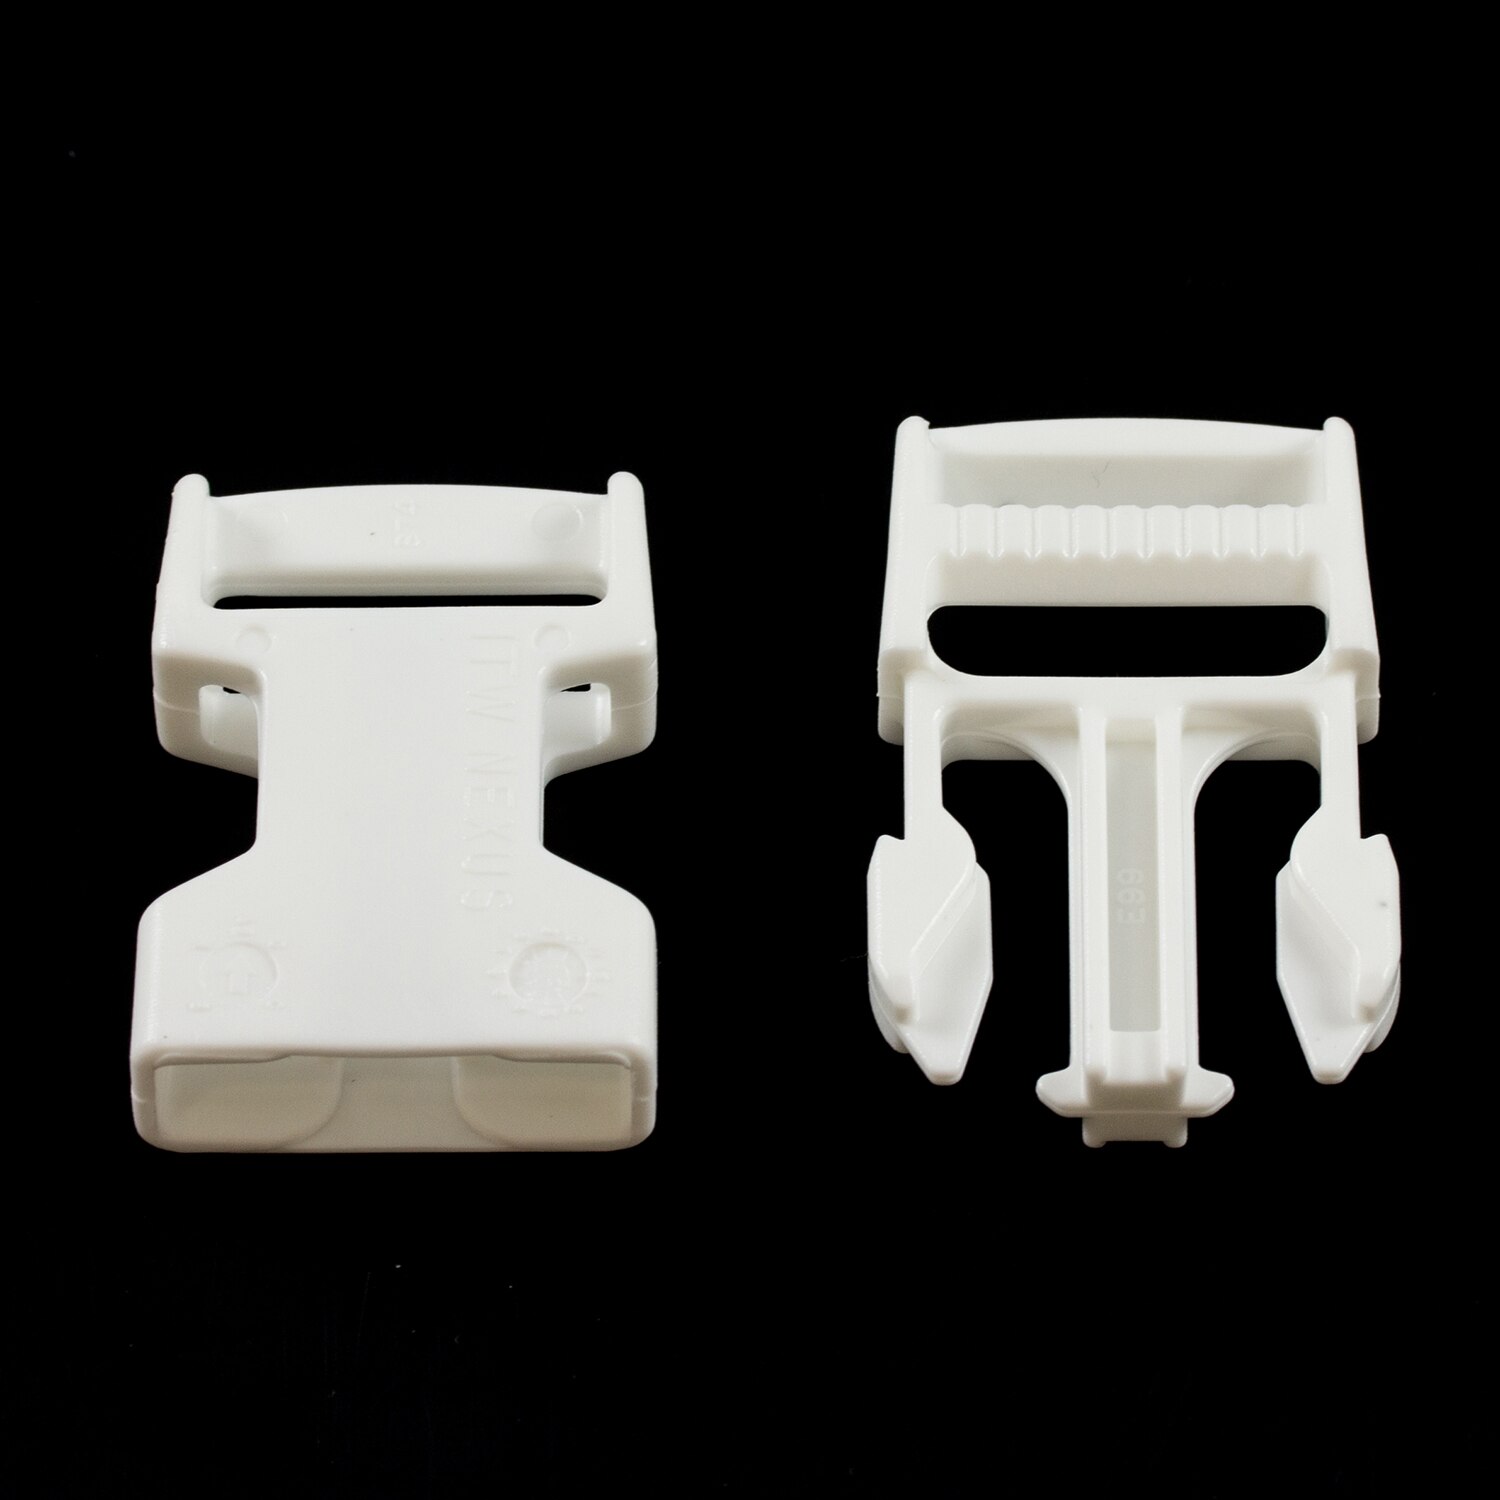 Fastex Side Release Buckle 1 Acetal White